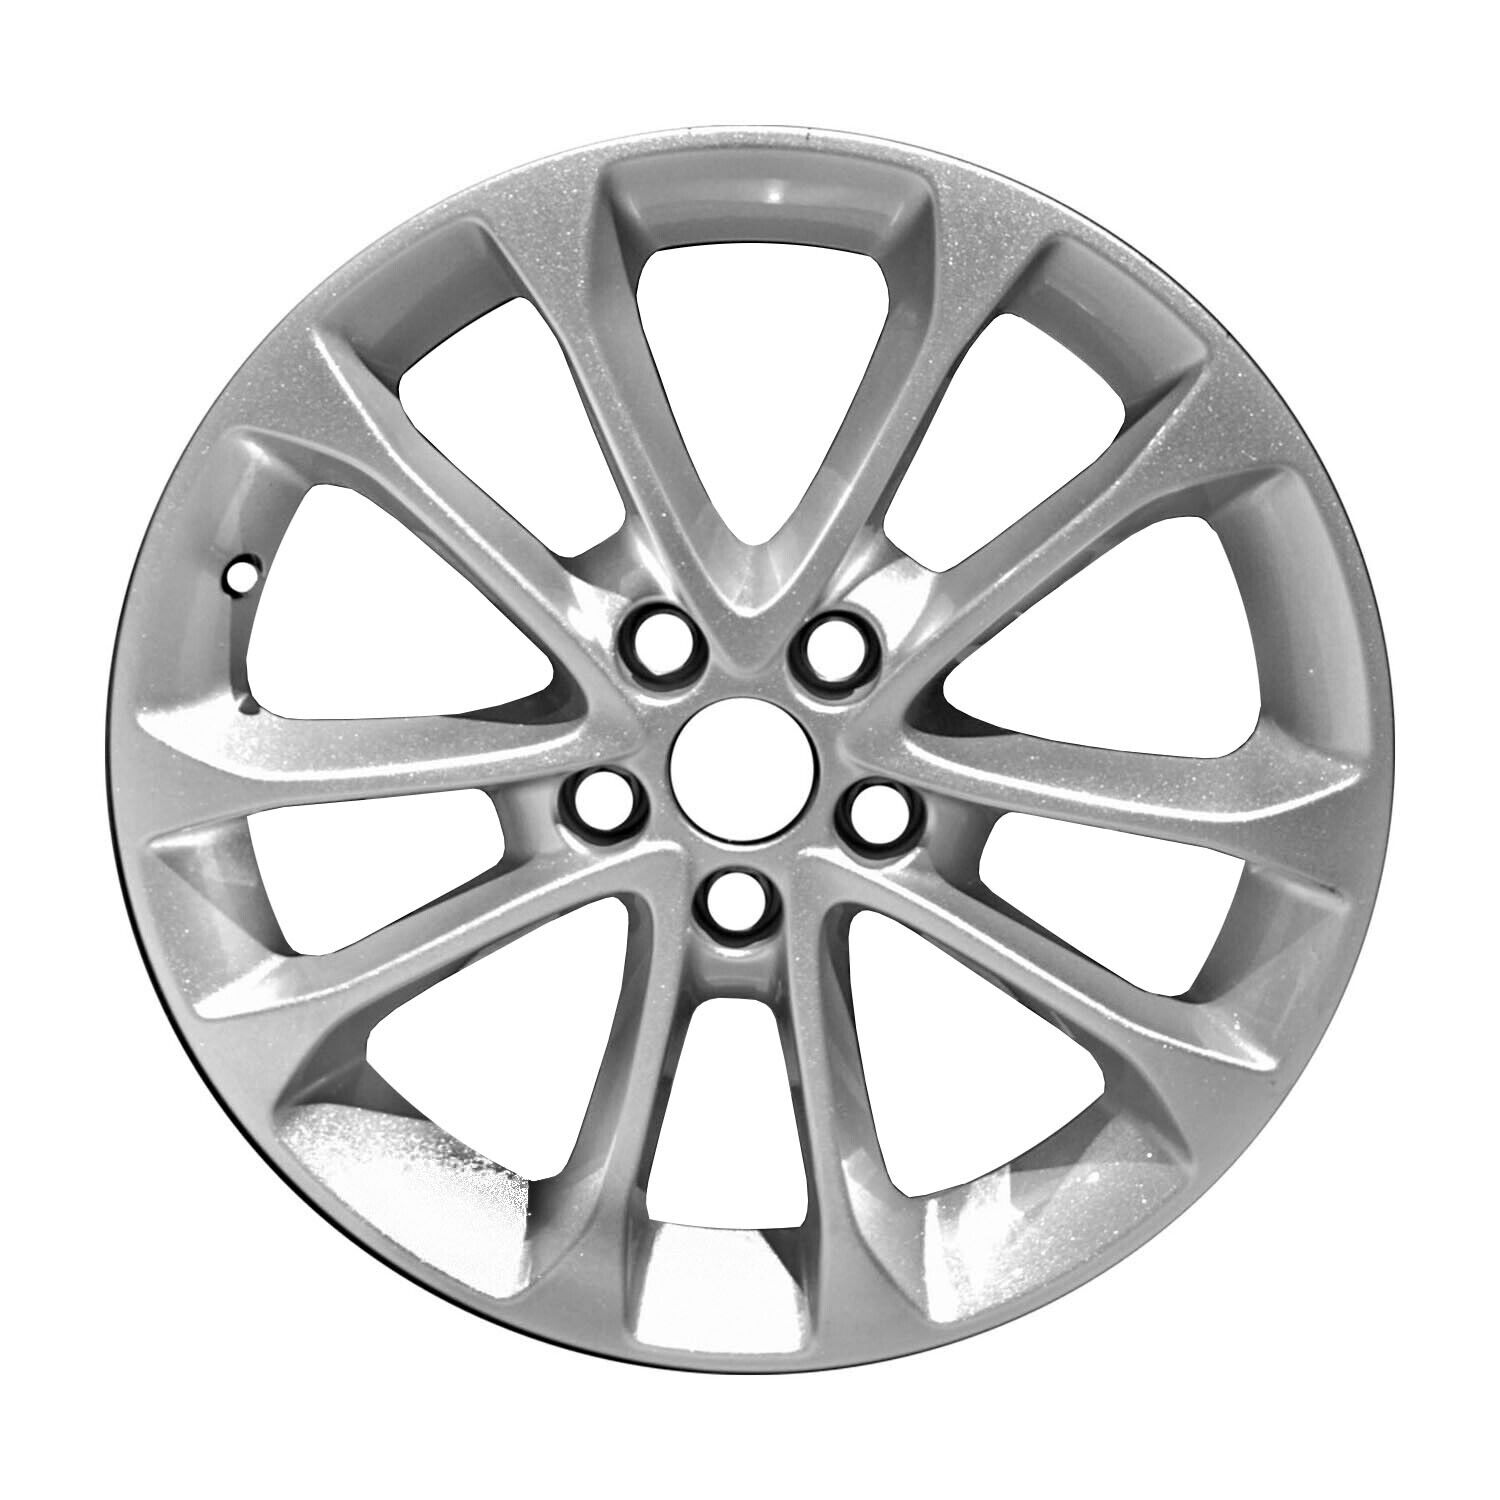 10205 Reconditioned OEM Aluminum Wheel 17x7.5 Fits 2019-2020 Ford Fusion